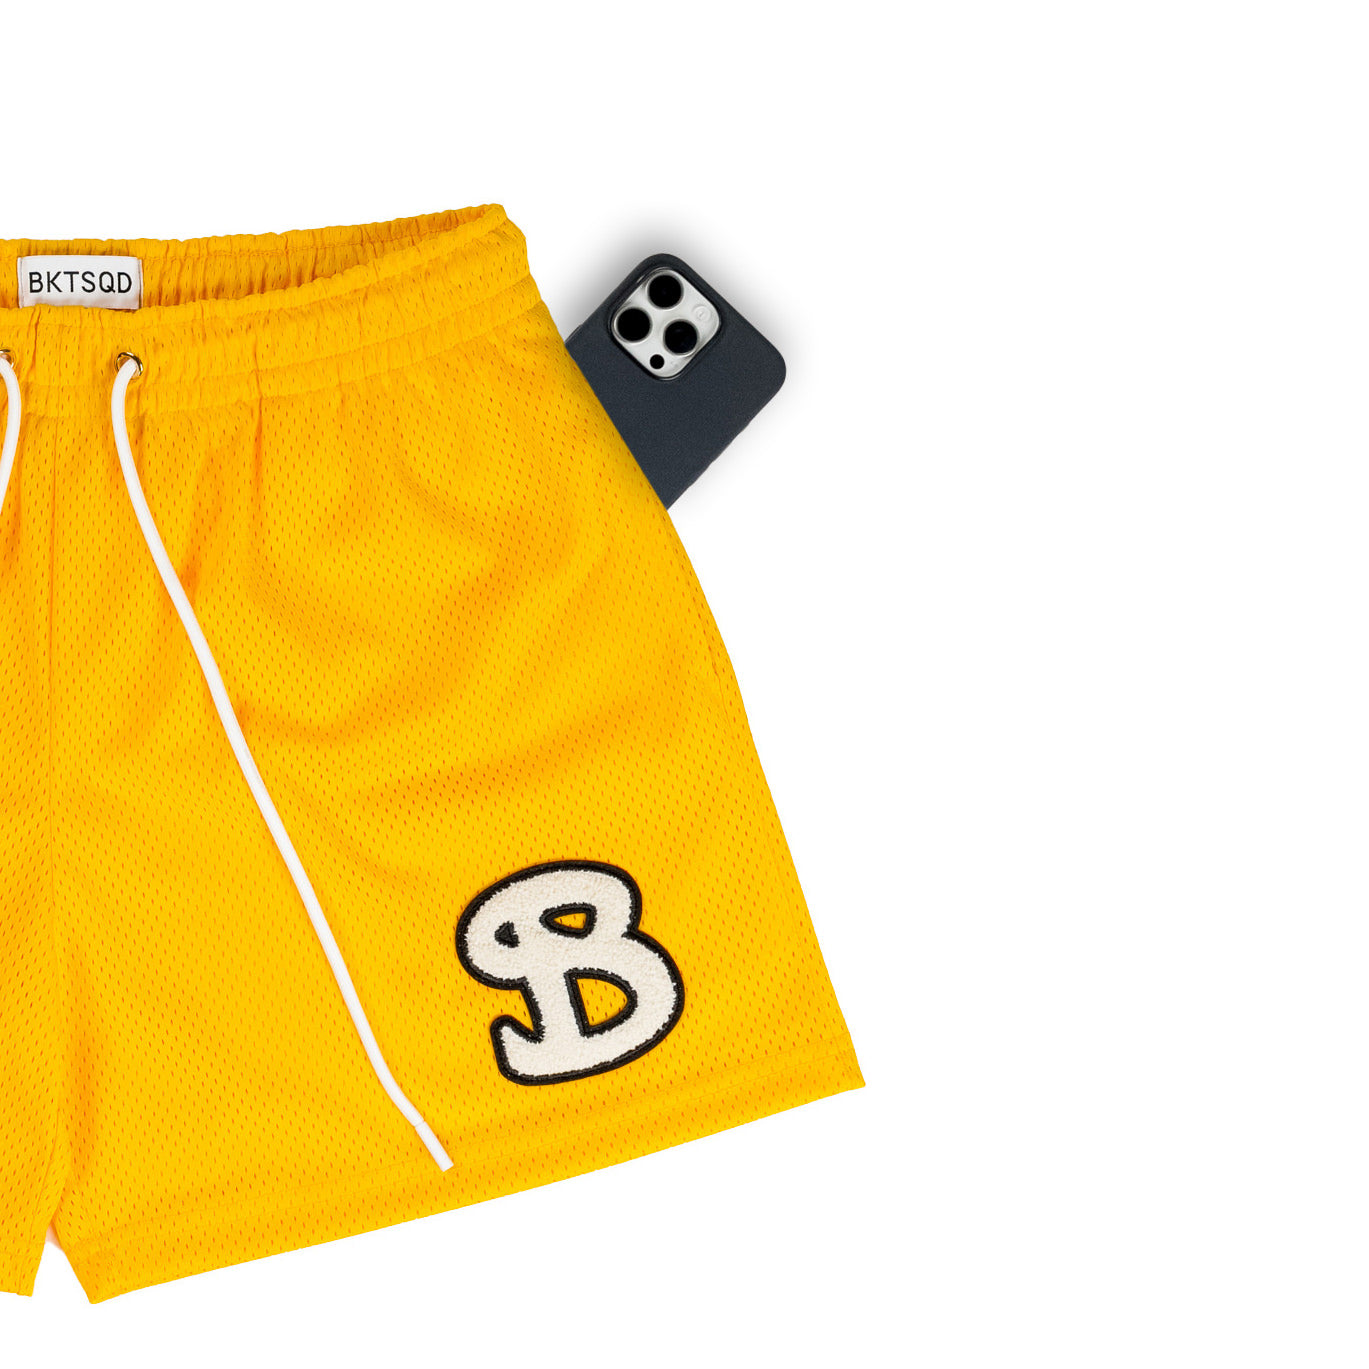 Classic Chenille Shorts Adult - Gold